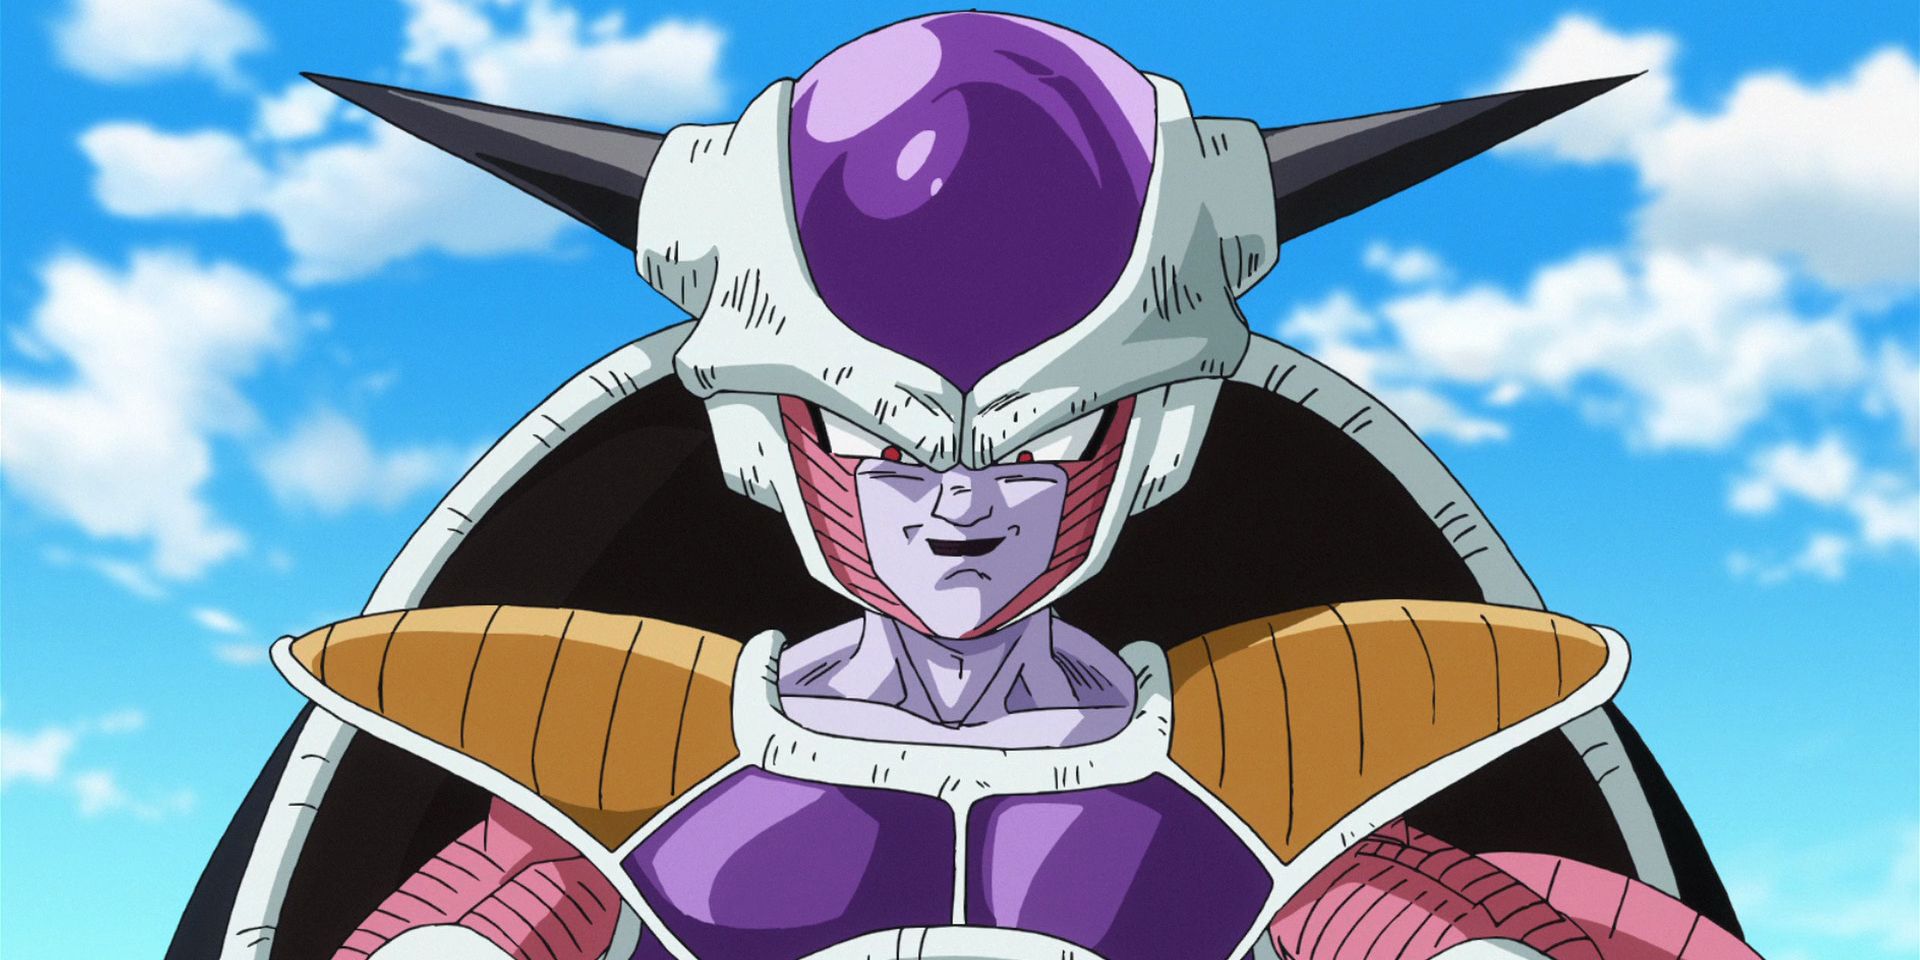 First Form Frieza looking down at Earth's heroes during Dragon Ball Super